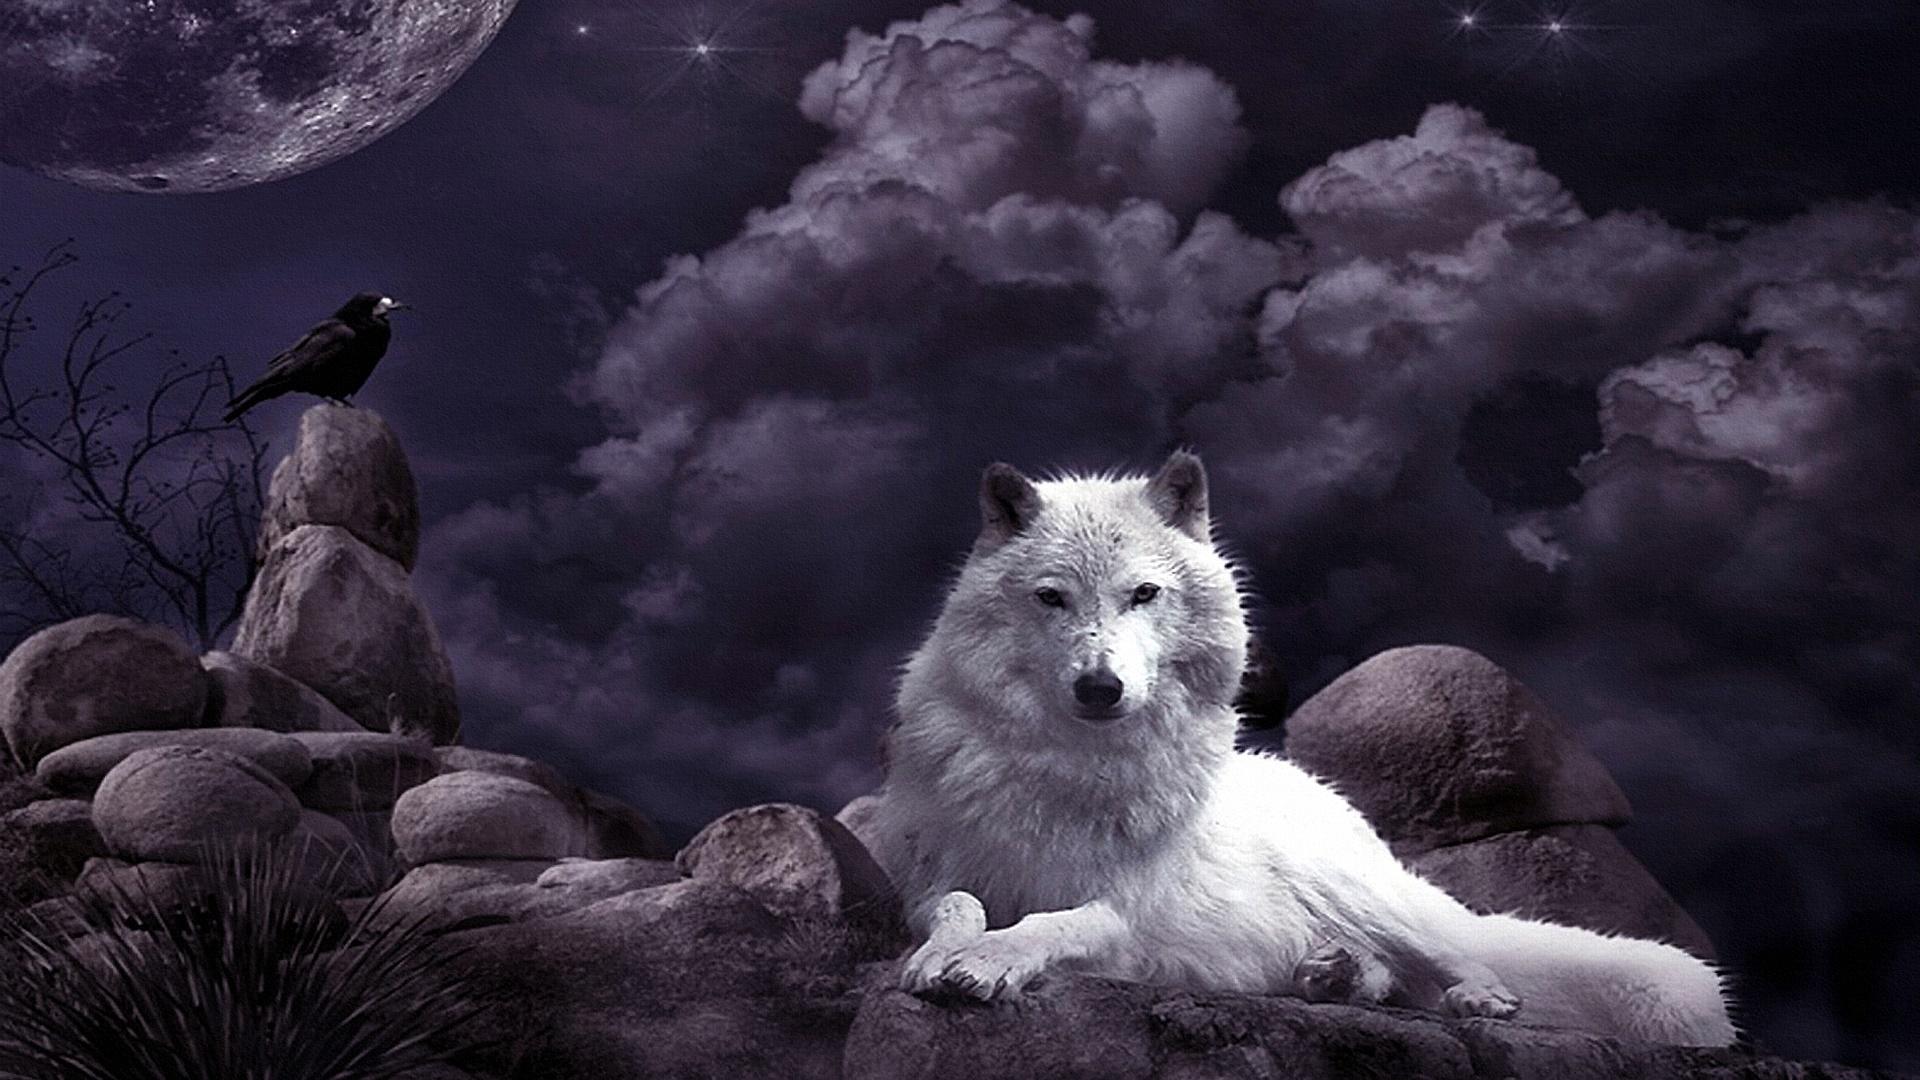 The Wolf The Crow And The Moon HD Wallpaper Ultra